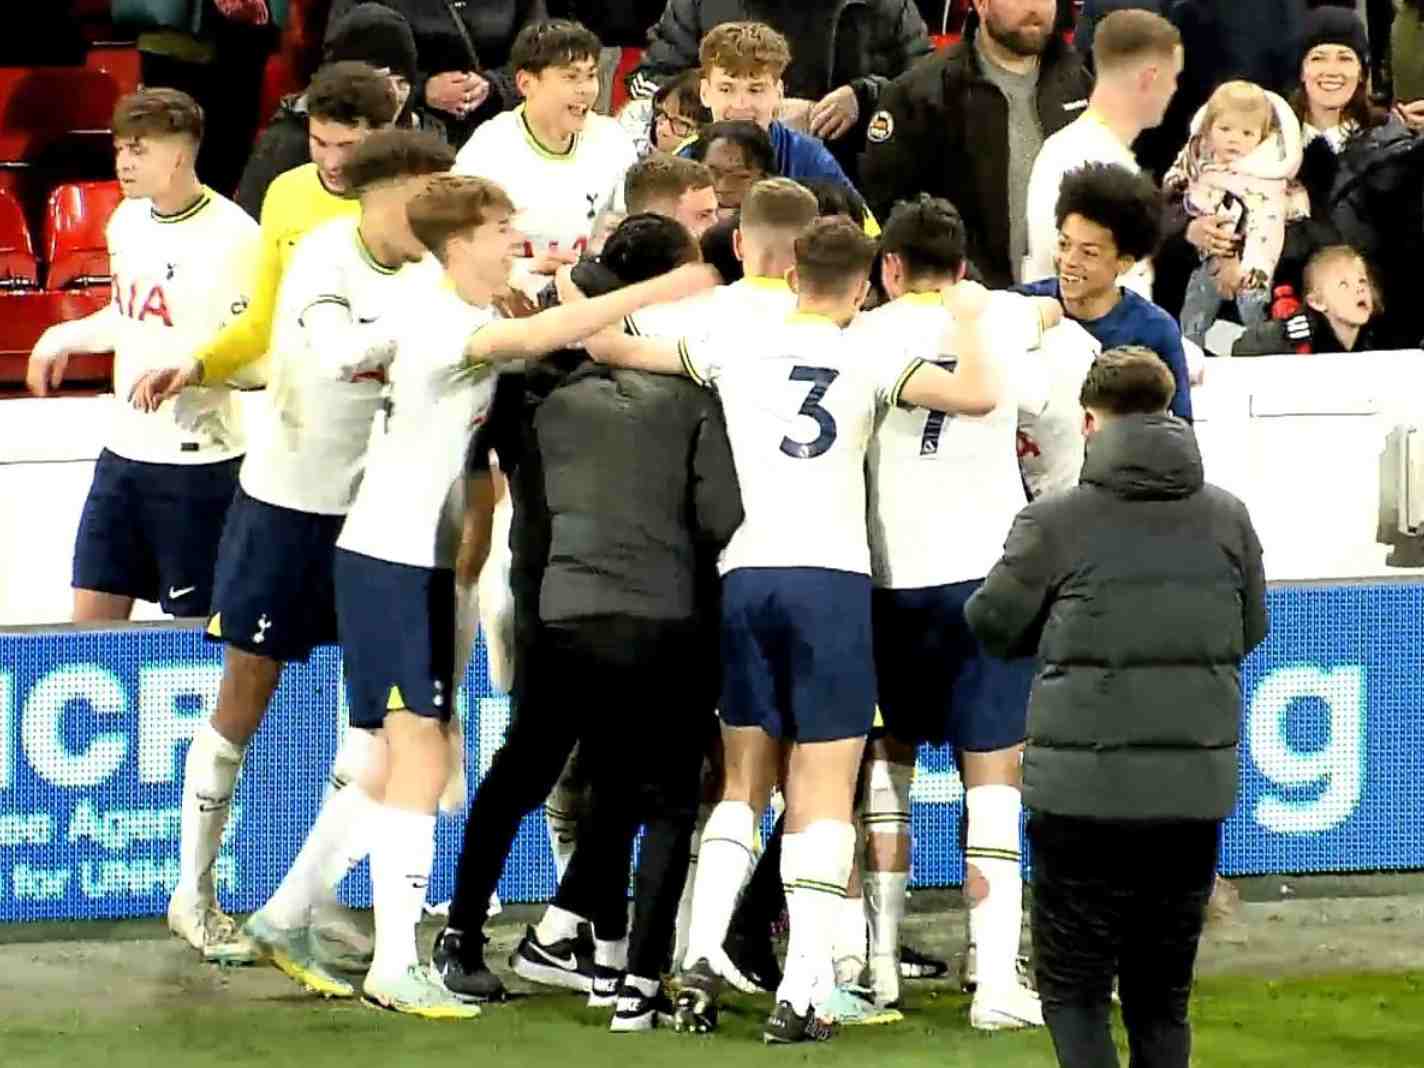 Tottenham U17s Bring Major Trophy Home and Fans Are Made Up for It